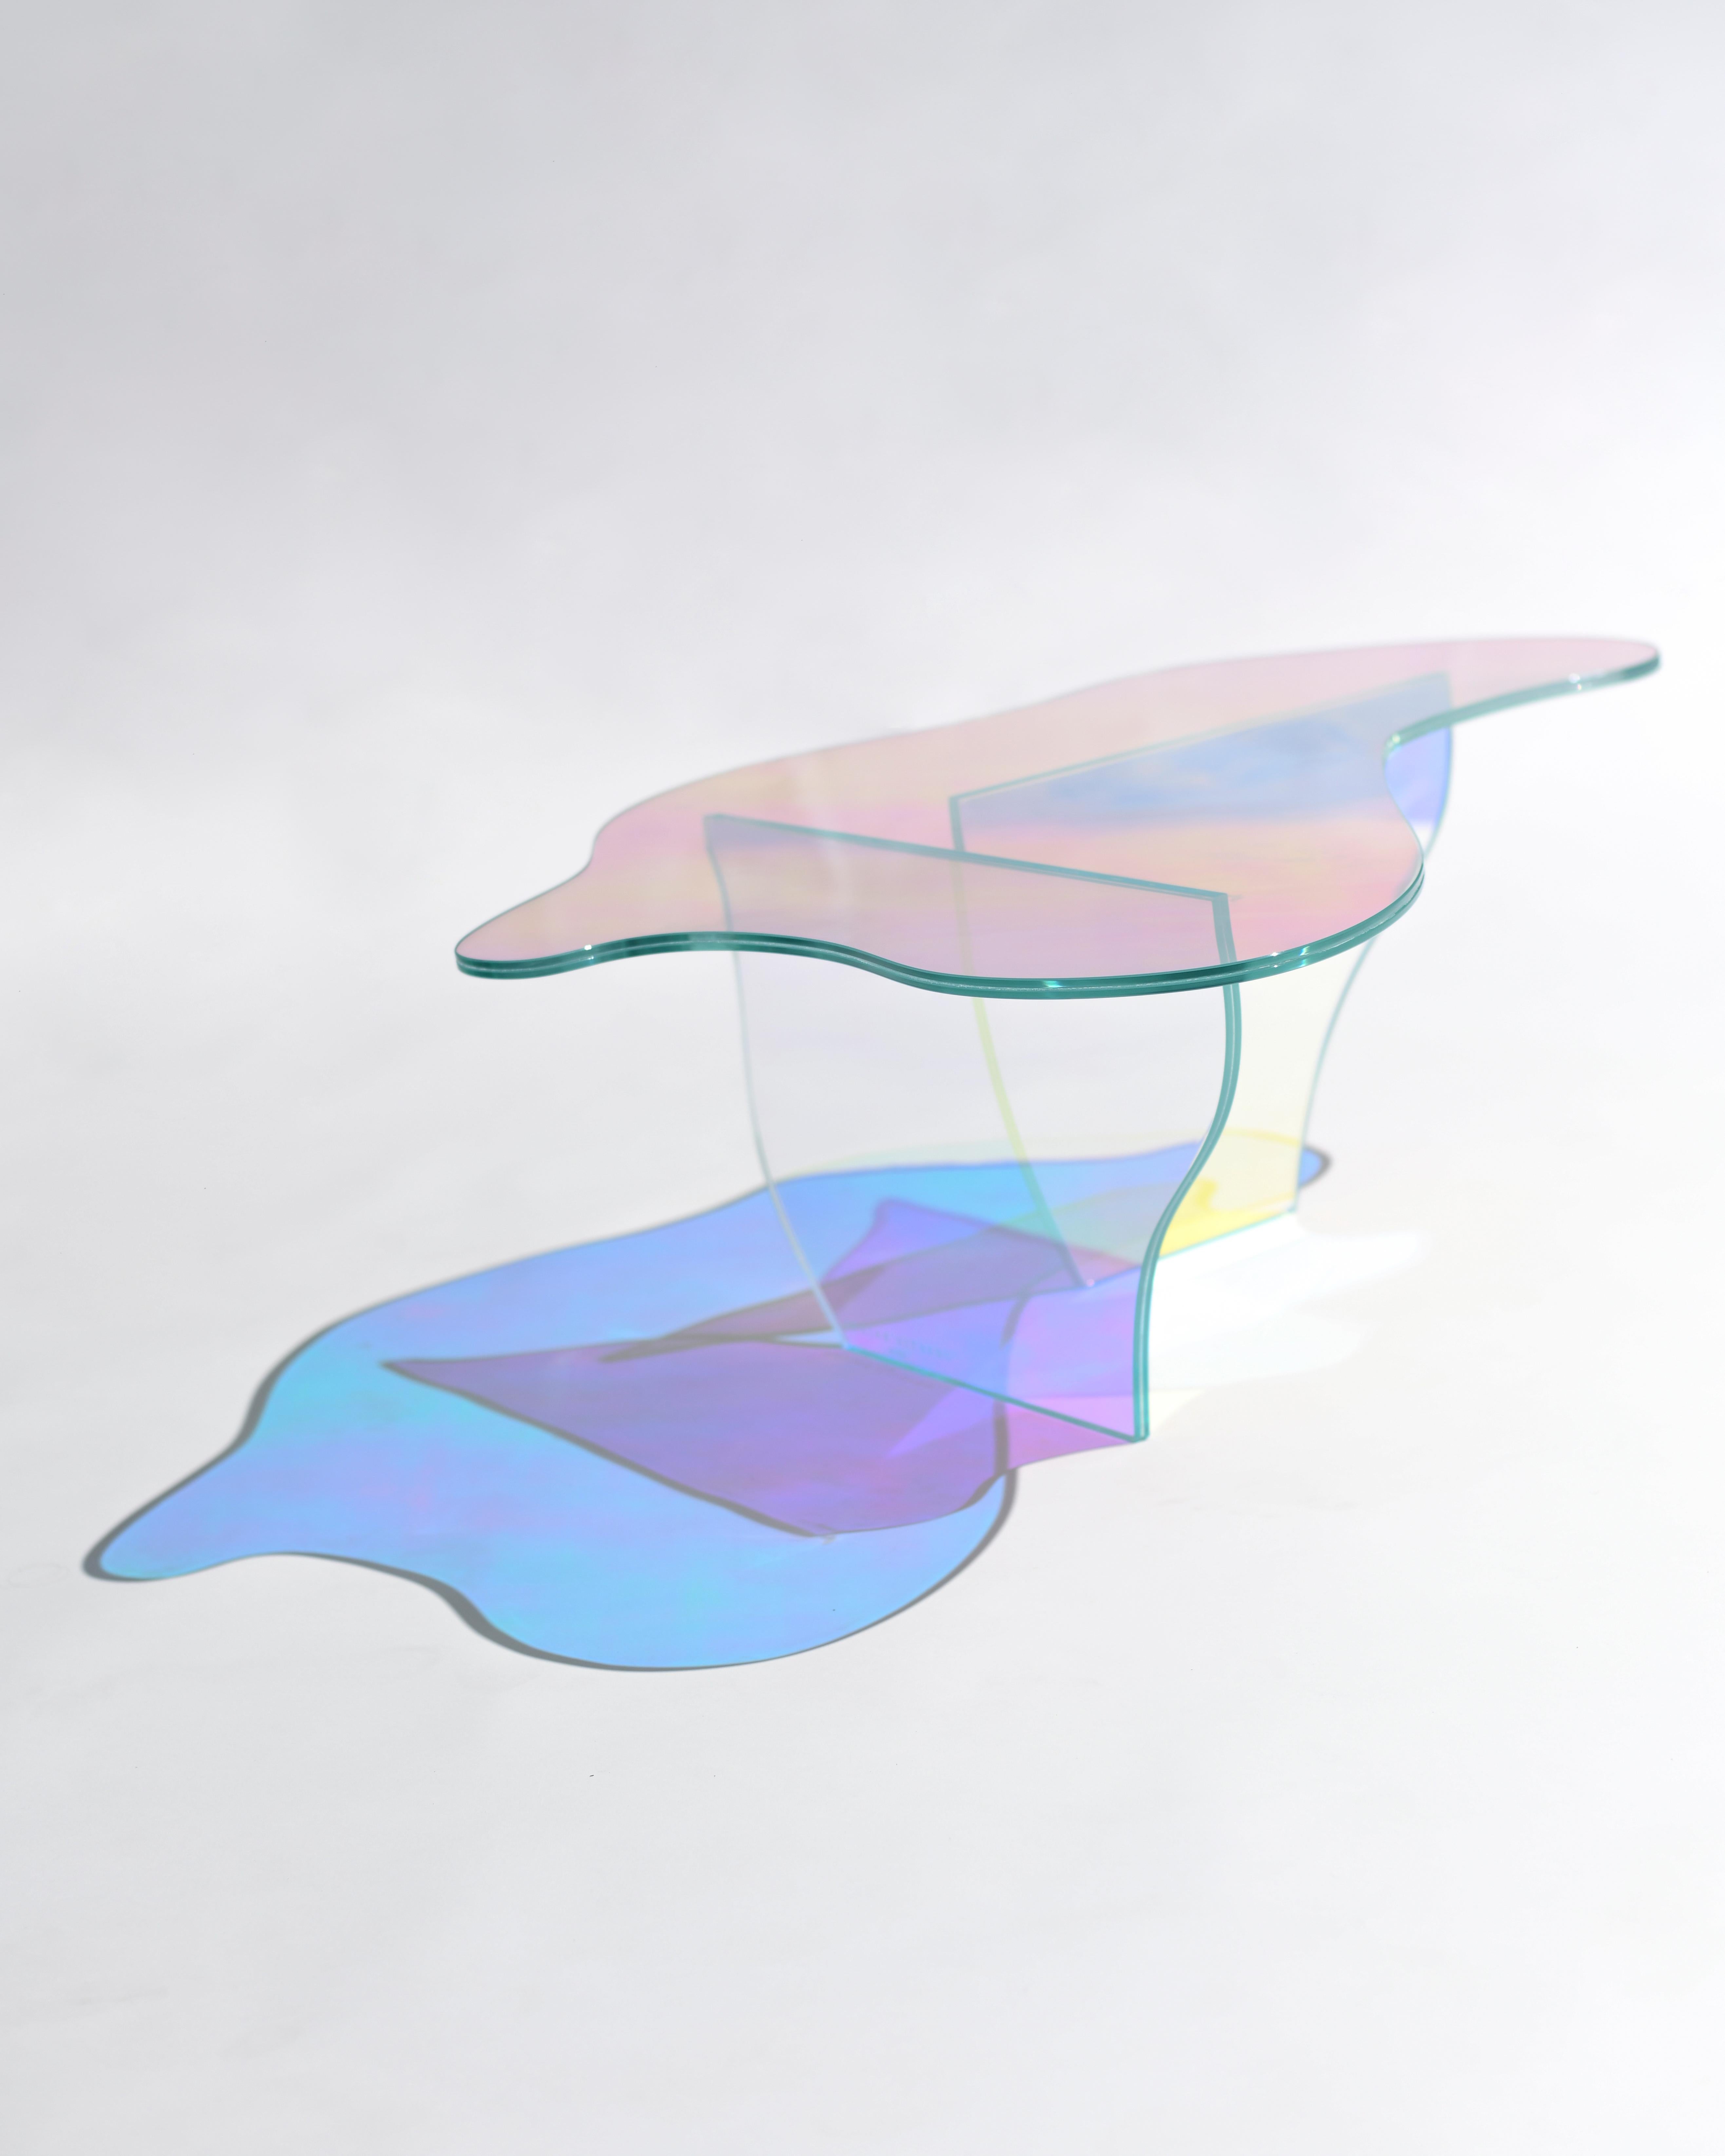 Kinetic colors glass table by Brajak Vitberg
Materials: Glass, dichroic film
Dimensions: 87 x 57 x 30 cm

Bijelic and Brajak are two architects from Ljubljana, Slovenia.
They are striving to design craft elements and make them timeless through